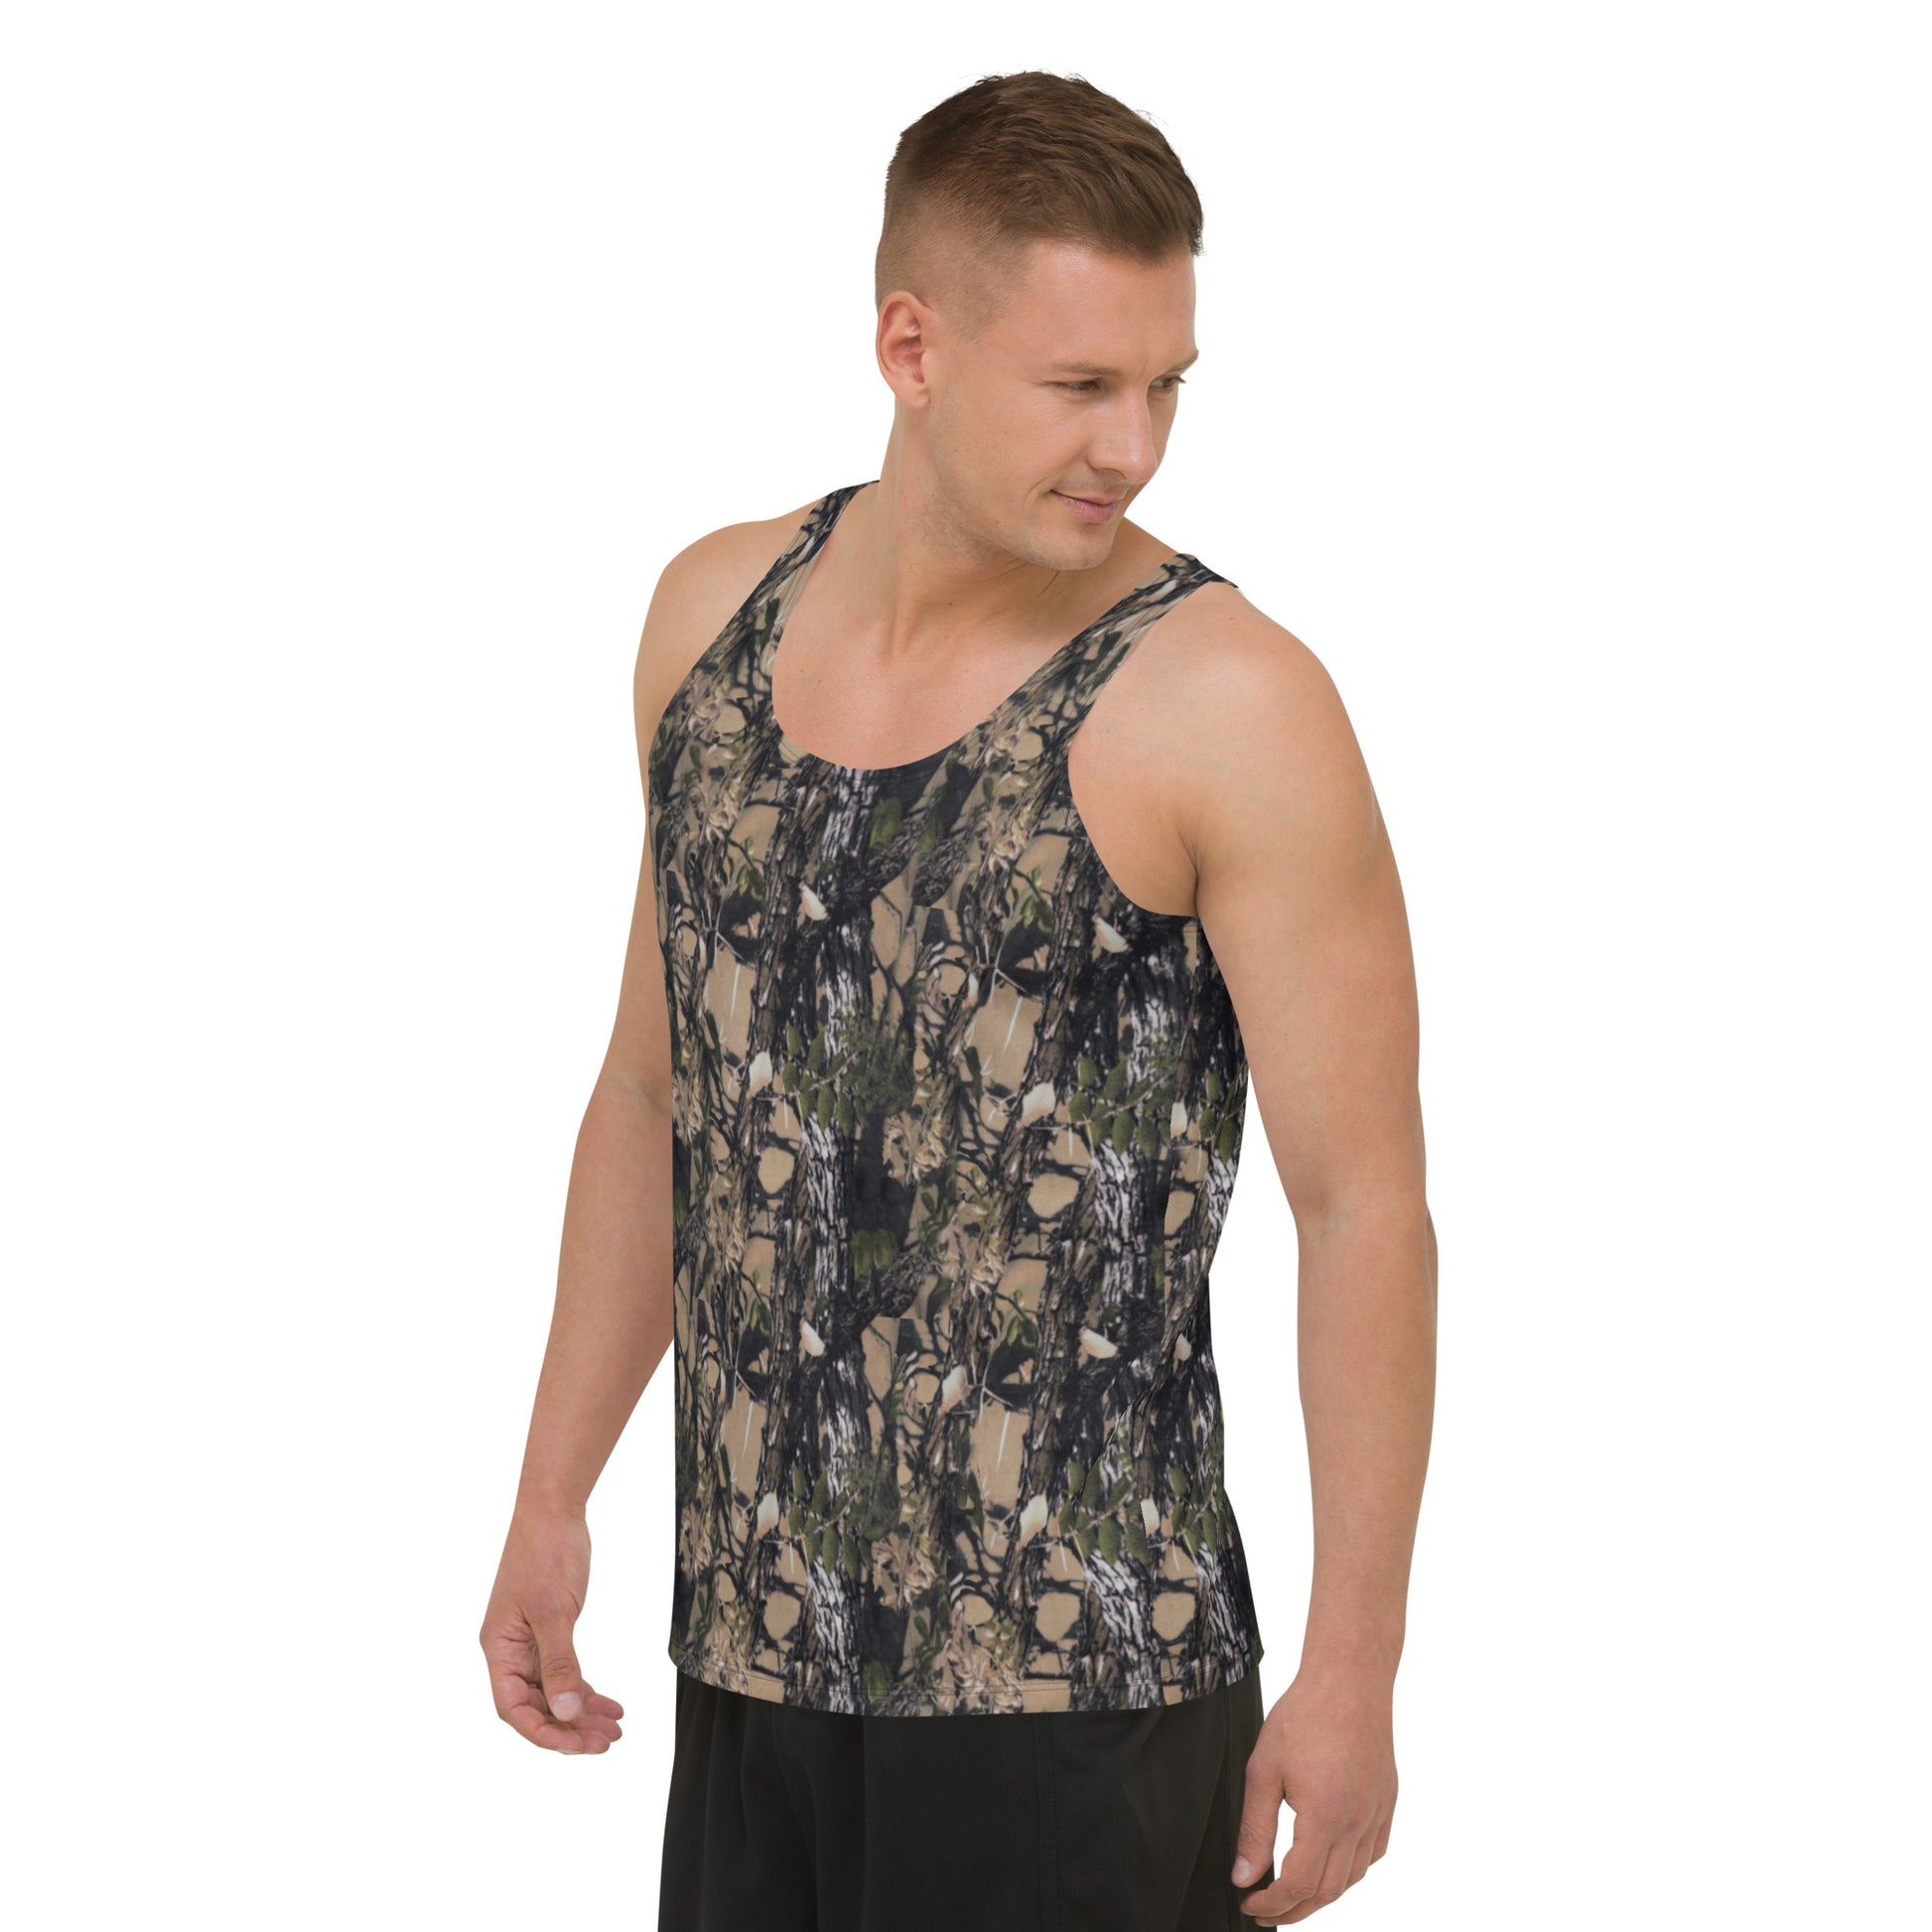 a picture of a man wearing a unisex all over printed Camouflage tank top - left front side